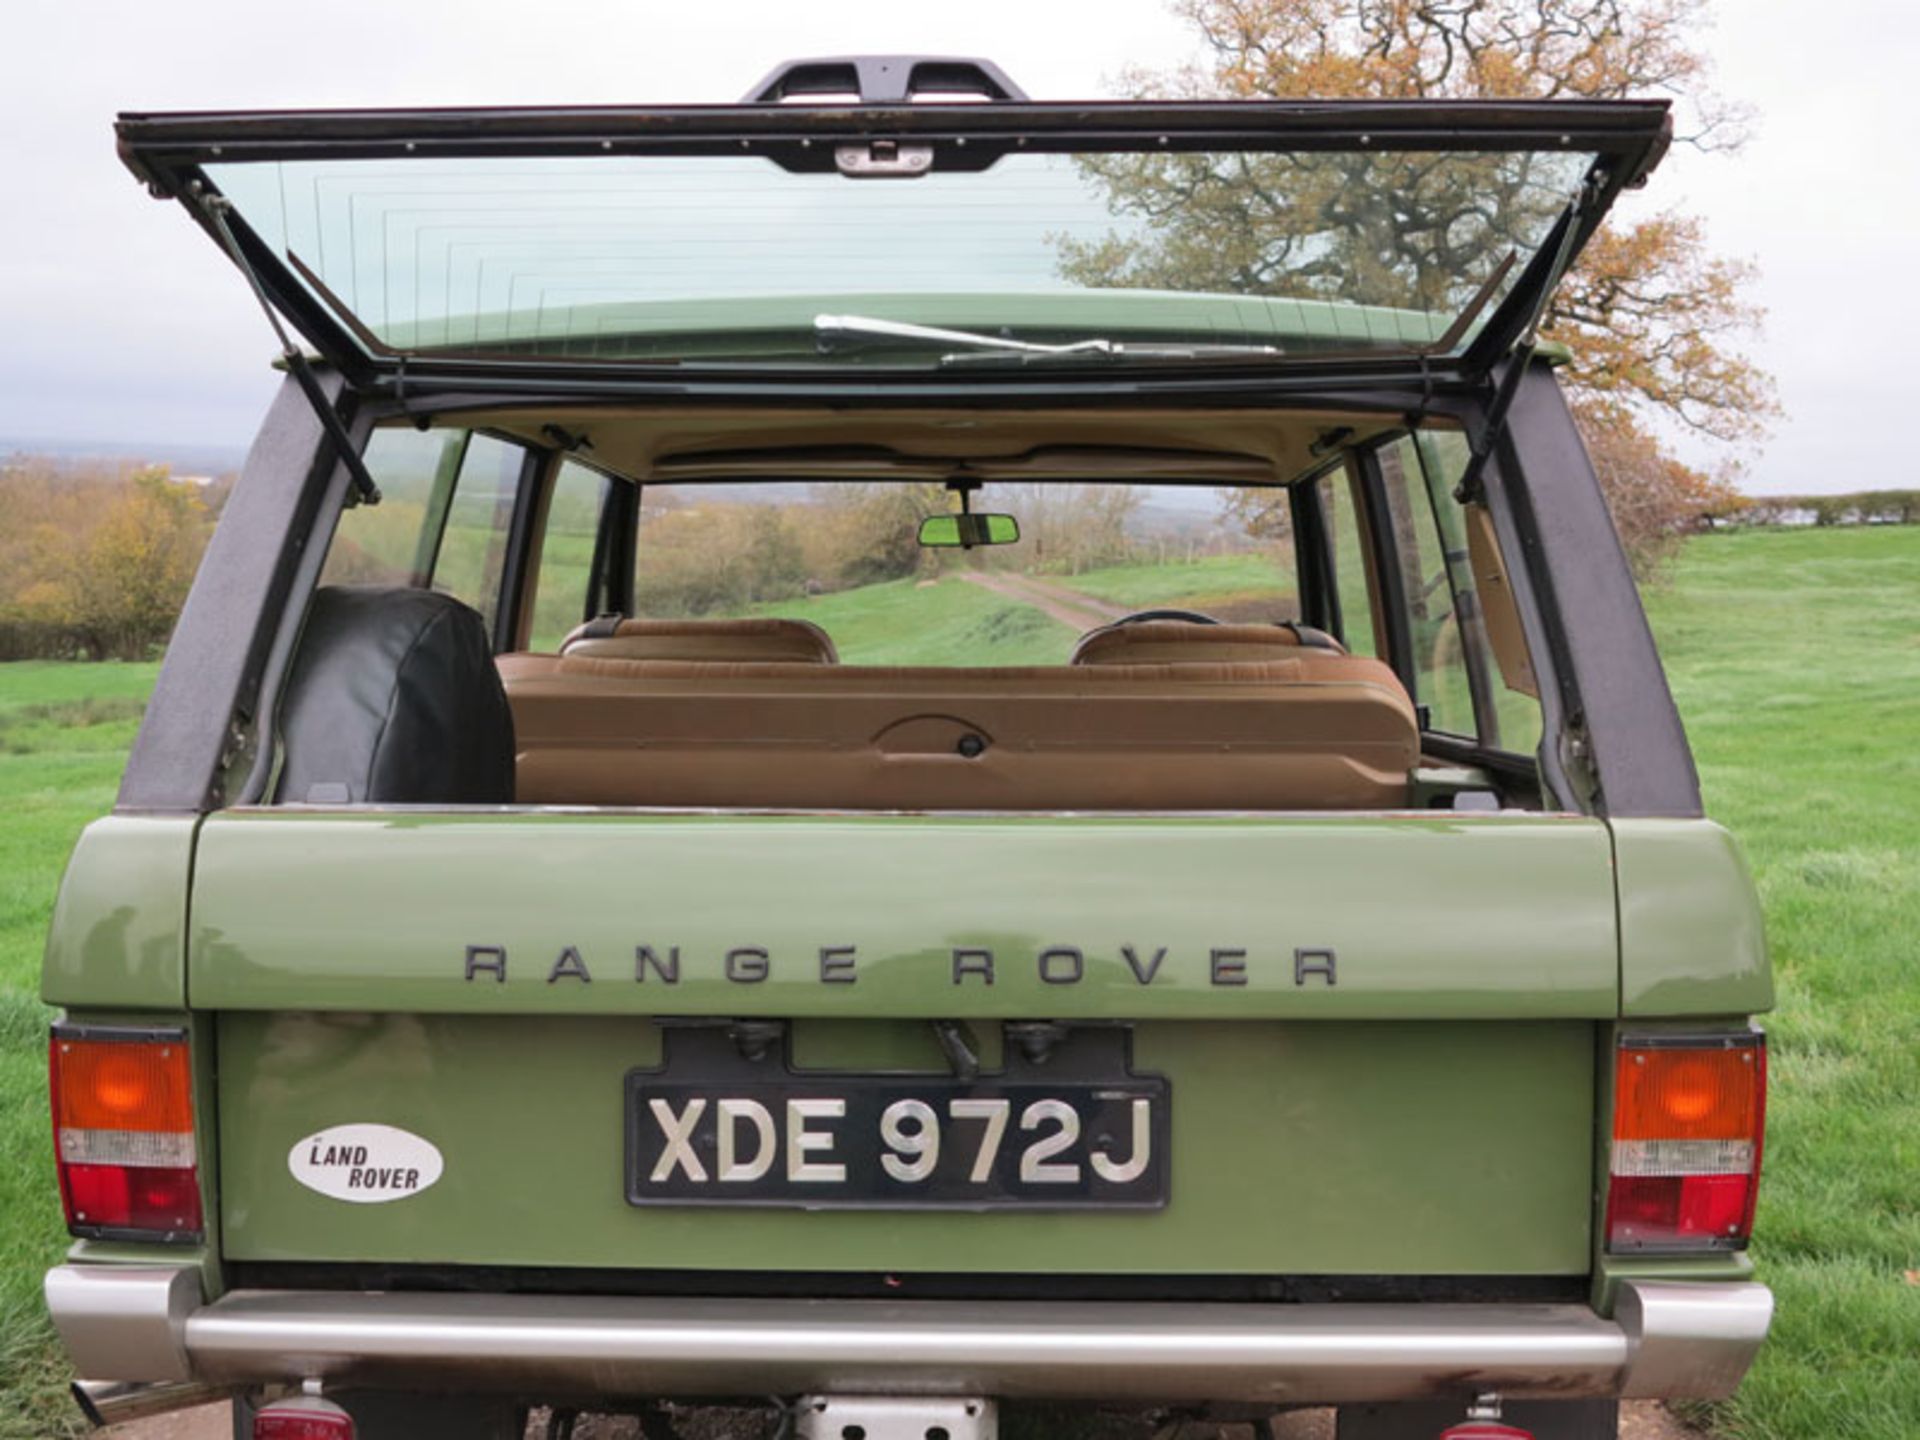 - Rare and desirable 'Suffix A' Range Rover

- 1 of 2,844 Home Market RHD cars built during the 1971 - Image 13 of 16